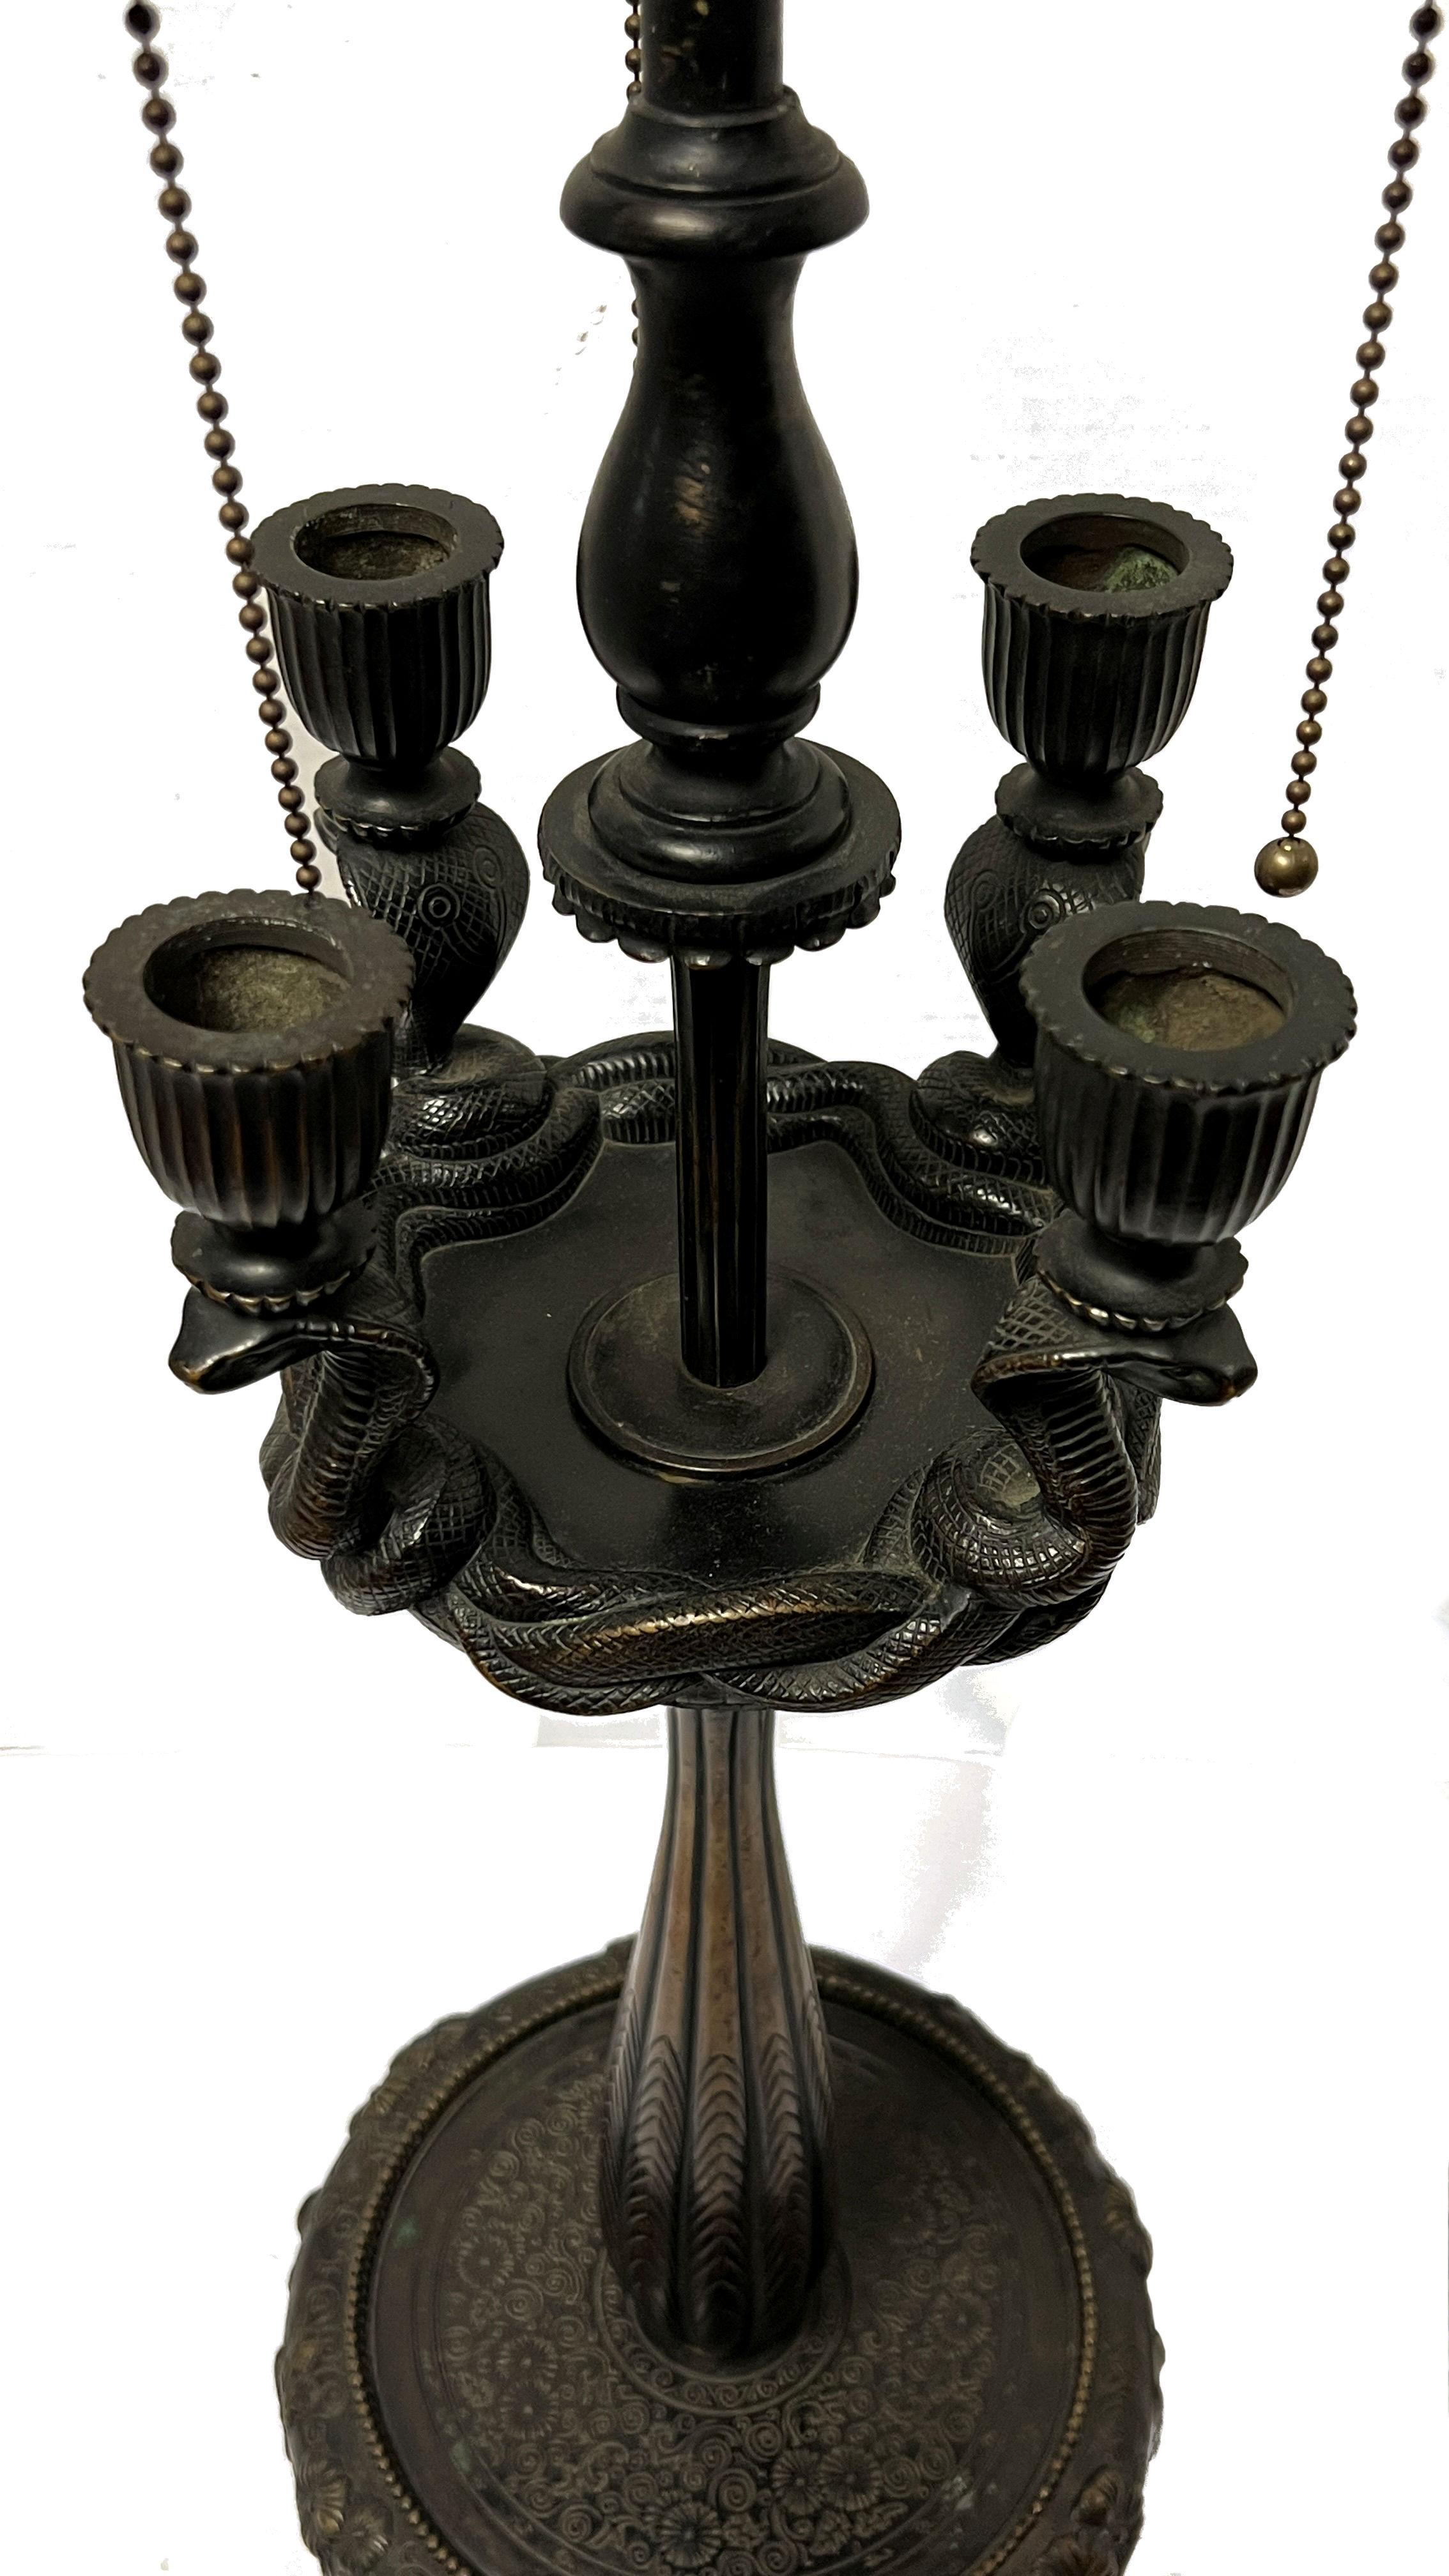 Neoclassical Revival Patinated Bronze Lamp in Manner of Armand-Albert Rateau Attributed to Caldwell